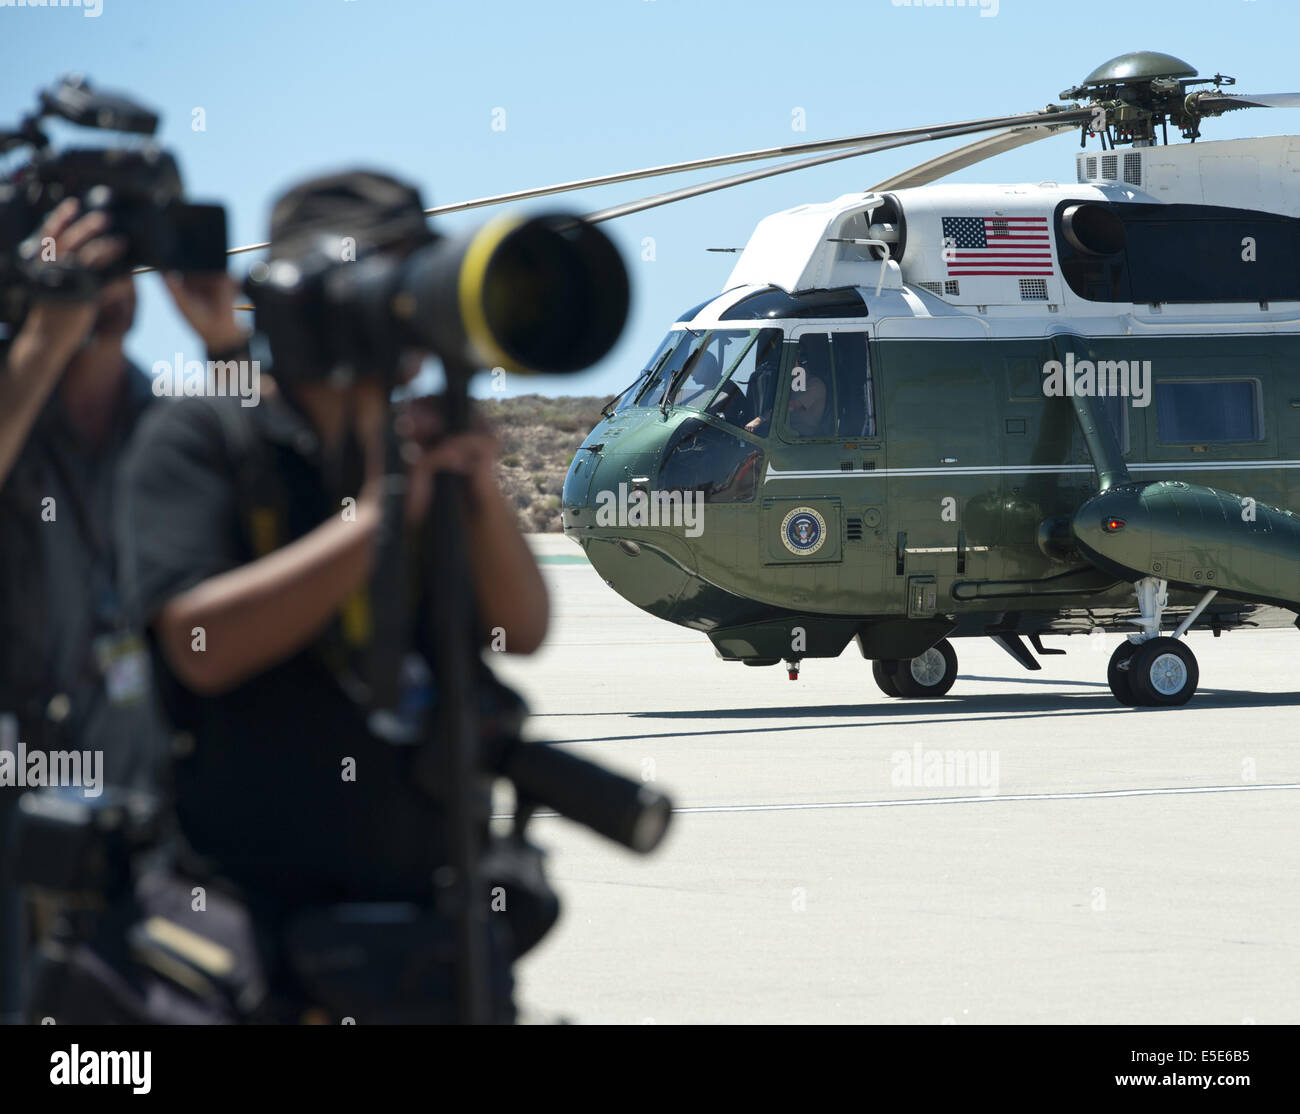 July 23, 2014 - Los Angeles, California, U.S - Marine One --- Marine One on the tarmac at LAX on Wednesday July 23, 2014, alongside news photographers waiting for the arrival of President Barack Obama.  Sikorsky's SH-3 Sea King helicopter has been in use by the US Marine Corps' HMX-1 squadron as the first choice for Marine One since not long after it was placed in service by the US Navy in 1961.  The familiar metallic green with white top Sea King is transported, along with the presidential limousine and other large equipment via a set of several C-17 Boeing Globemaster transport aircraft oper Stock Photo